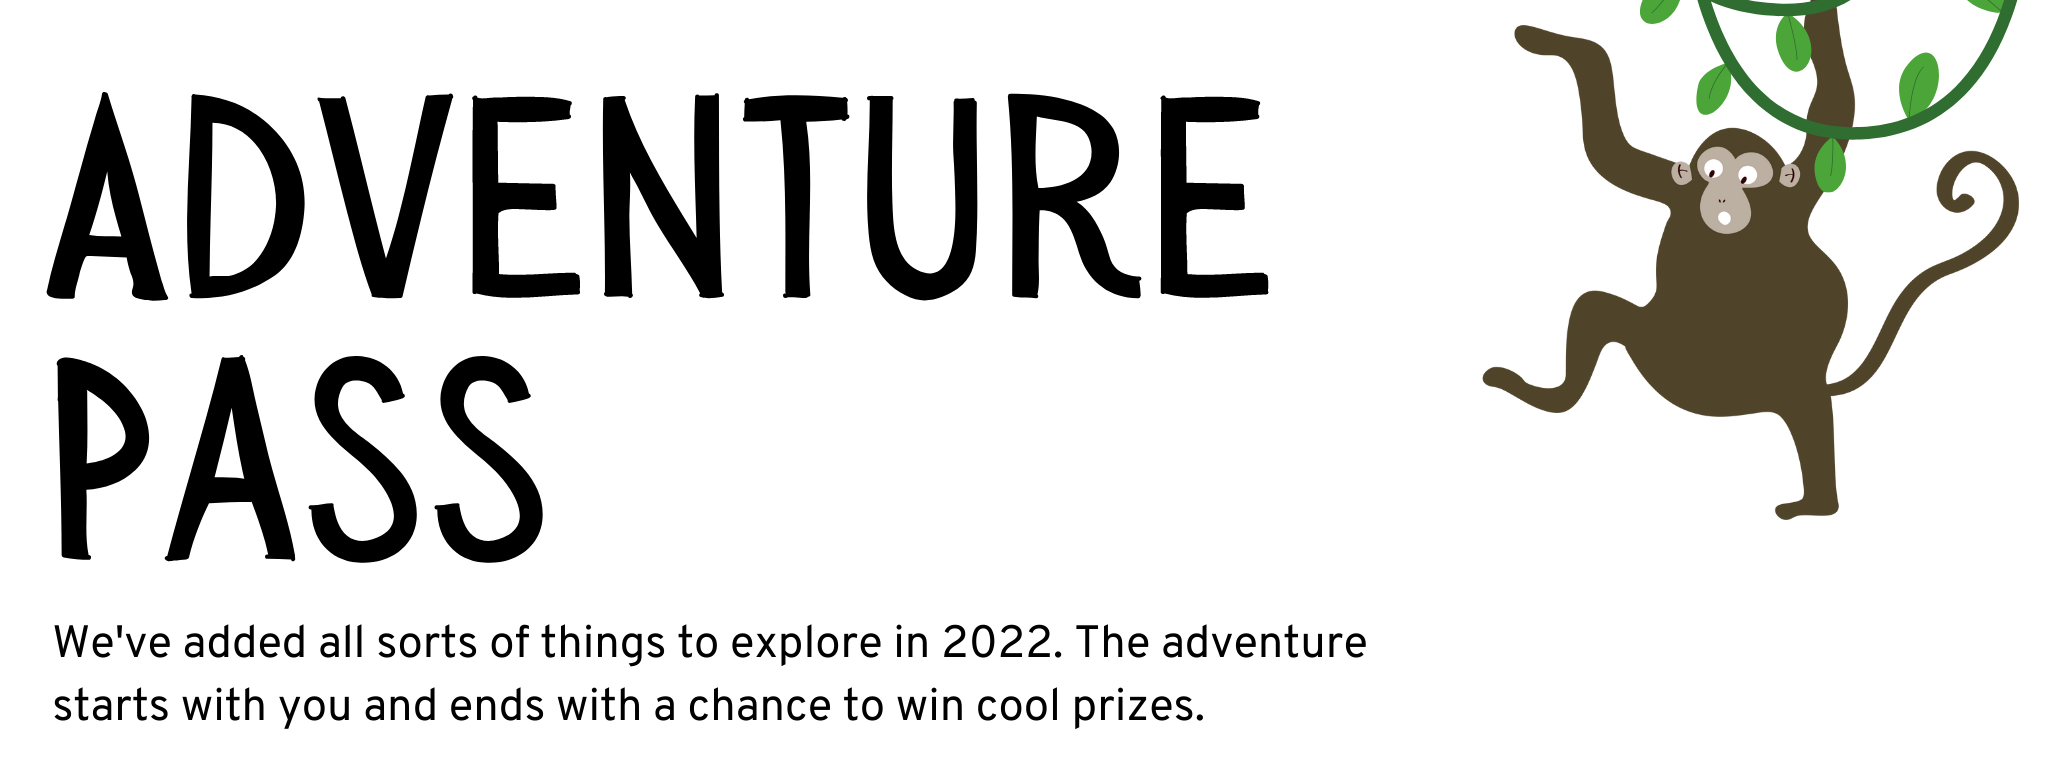 Here's what you can expect for adventures